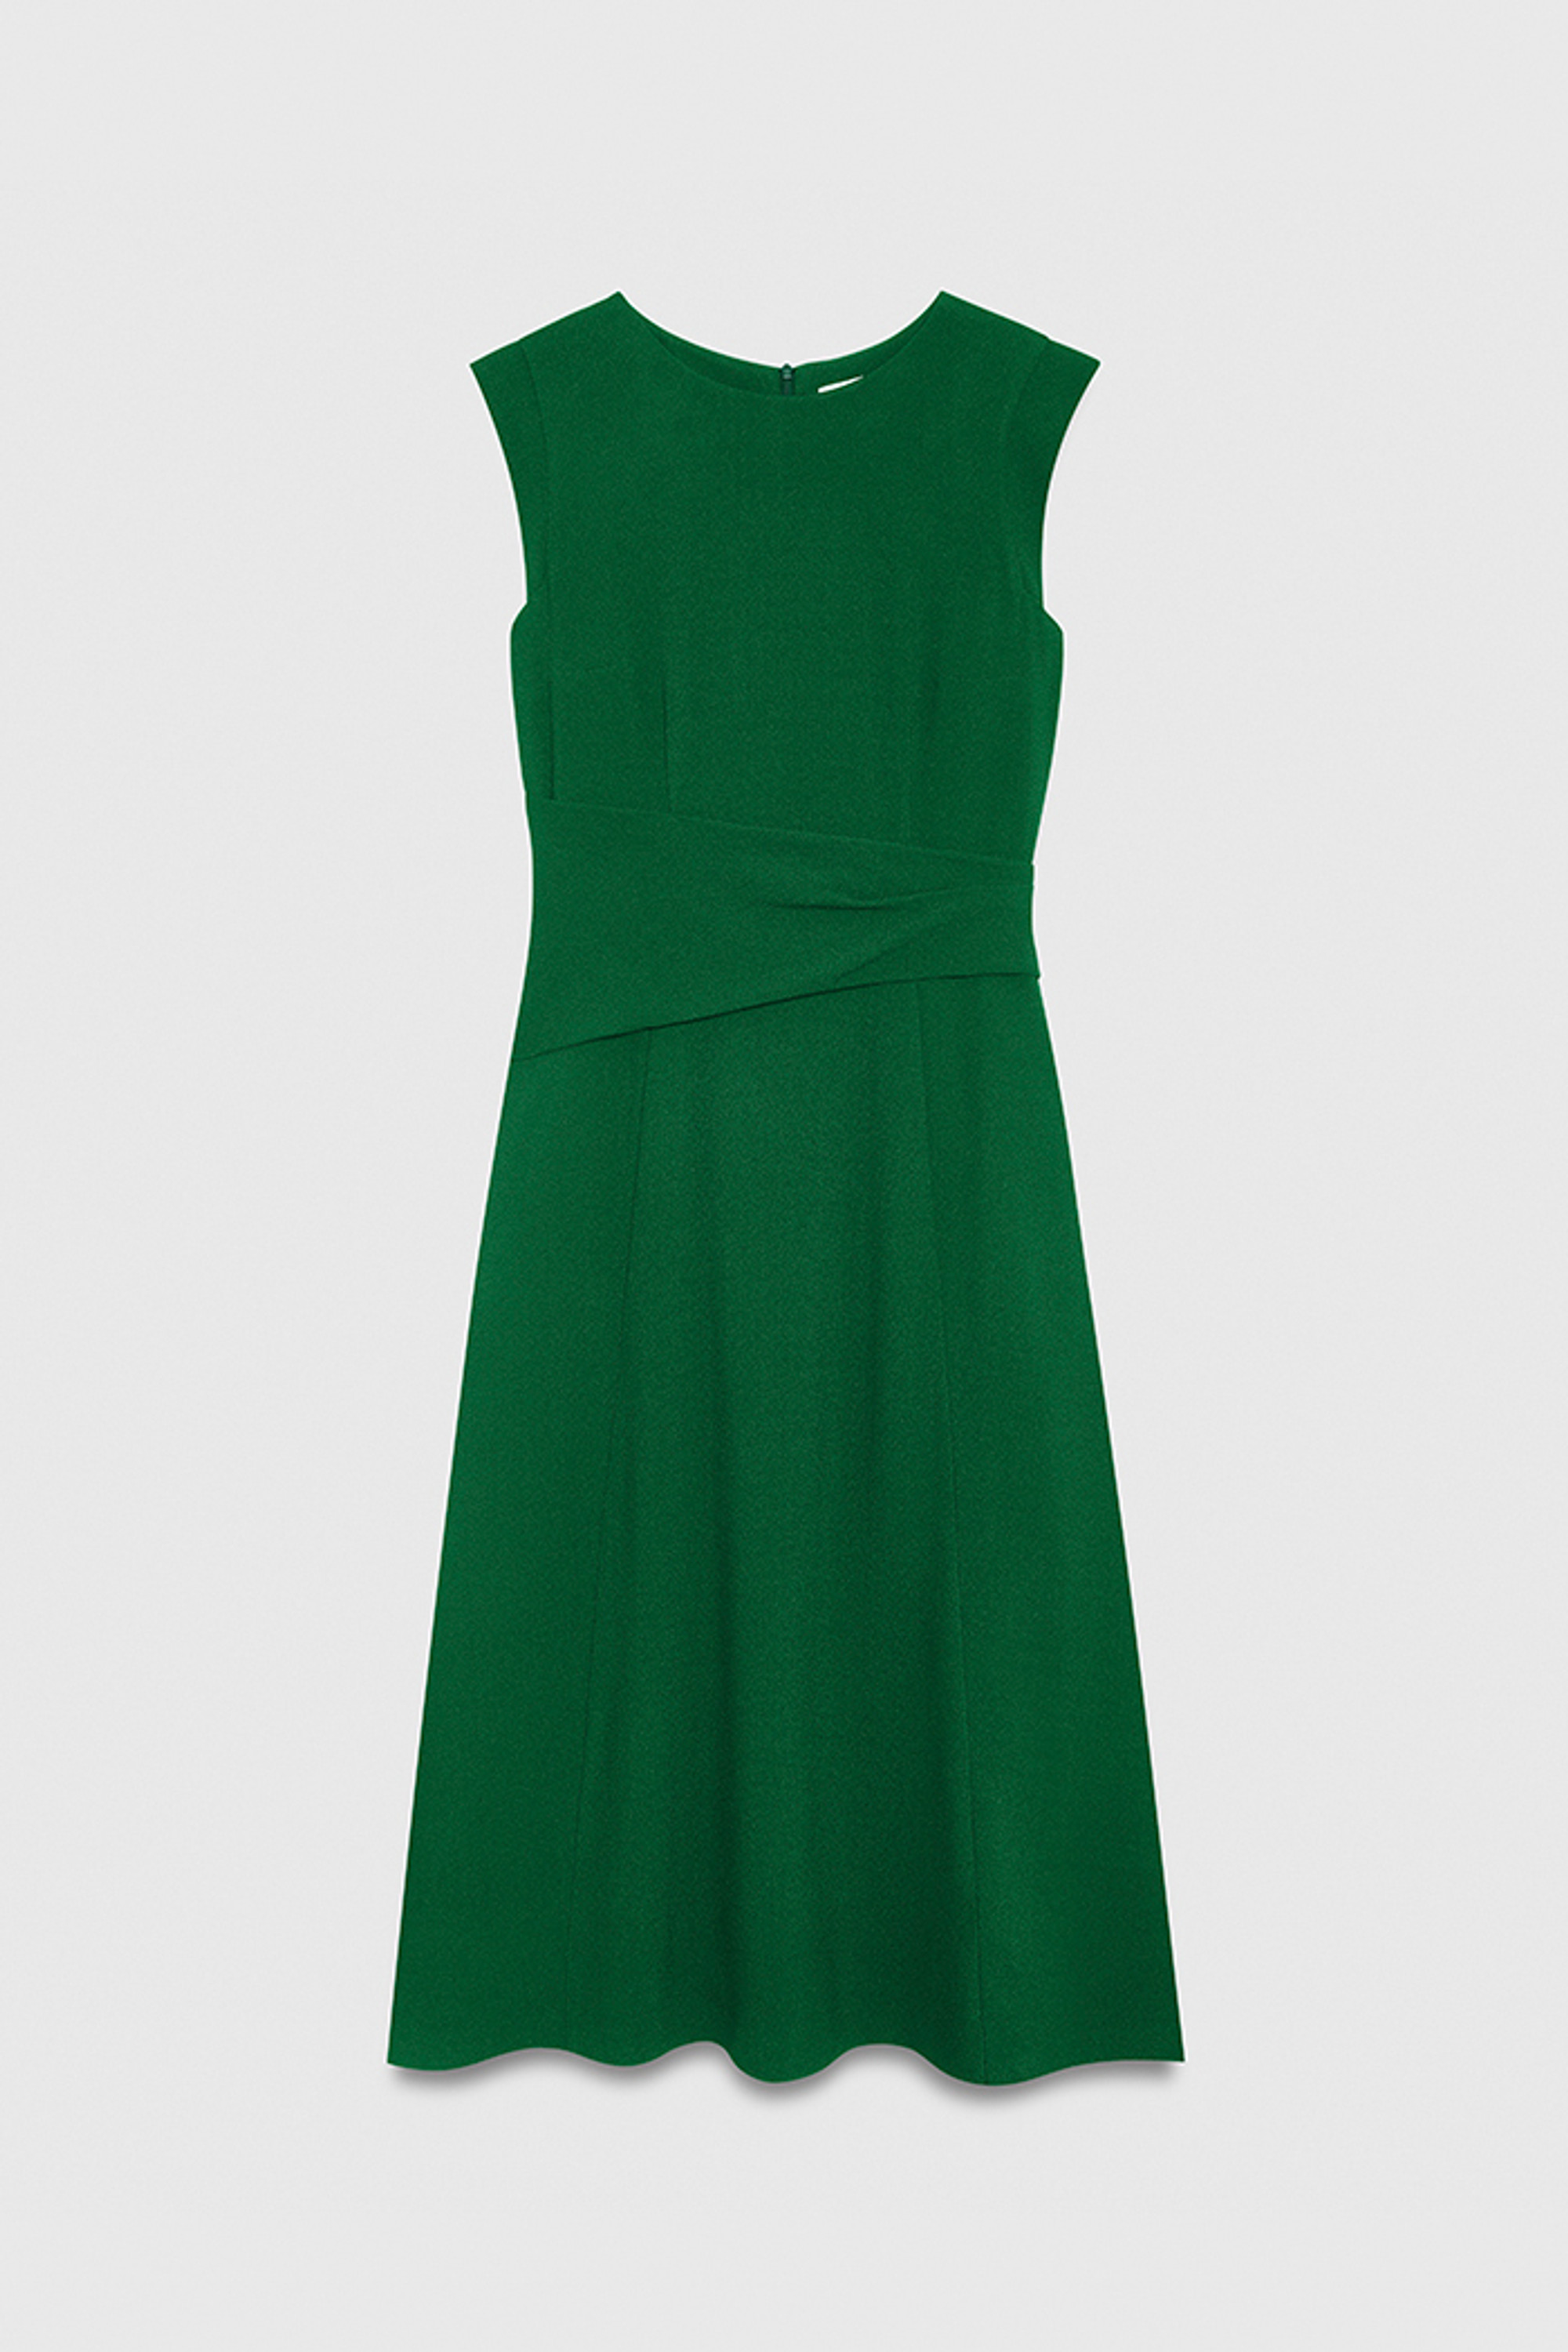 the Dress Laurel Welcome Crepe LTD Clever - Sabine to Fold Midi Green